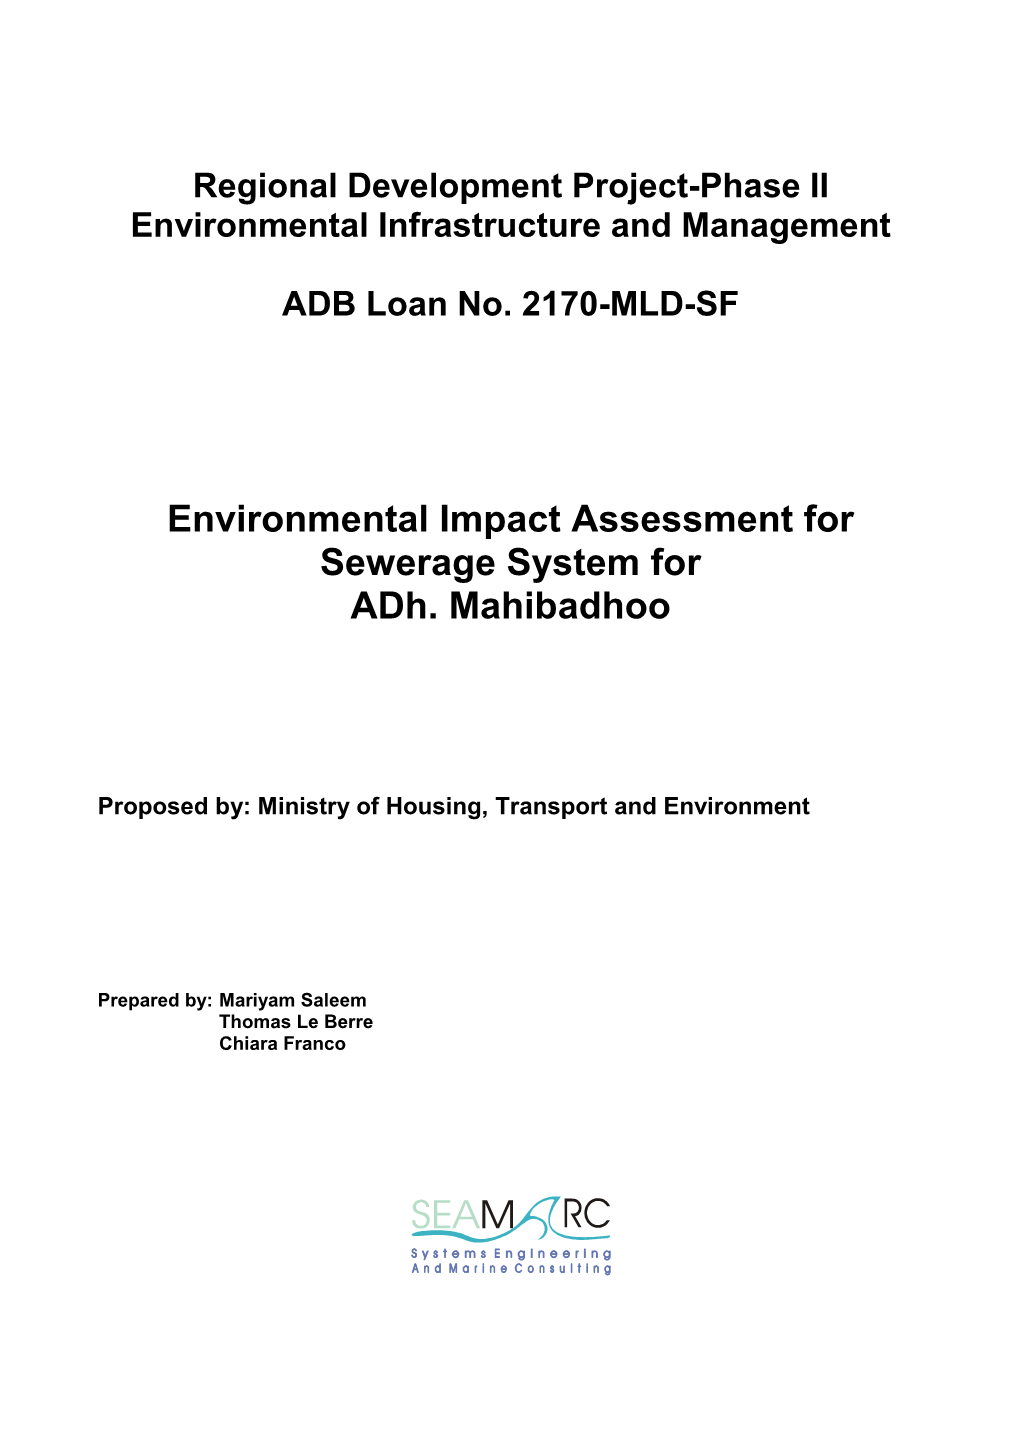 Environmental Impact Assessment for Sewerage System for Adh. Mahibadhoo